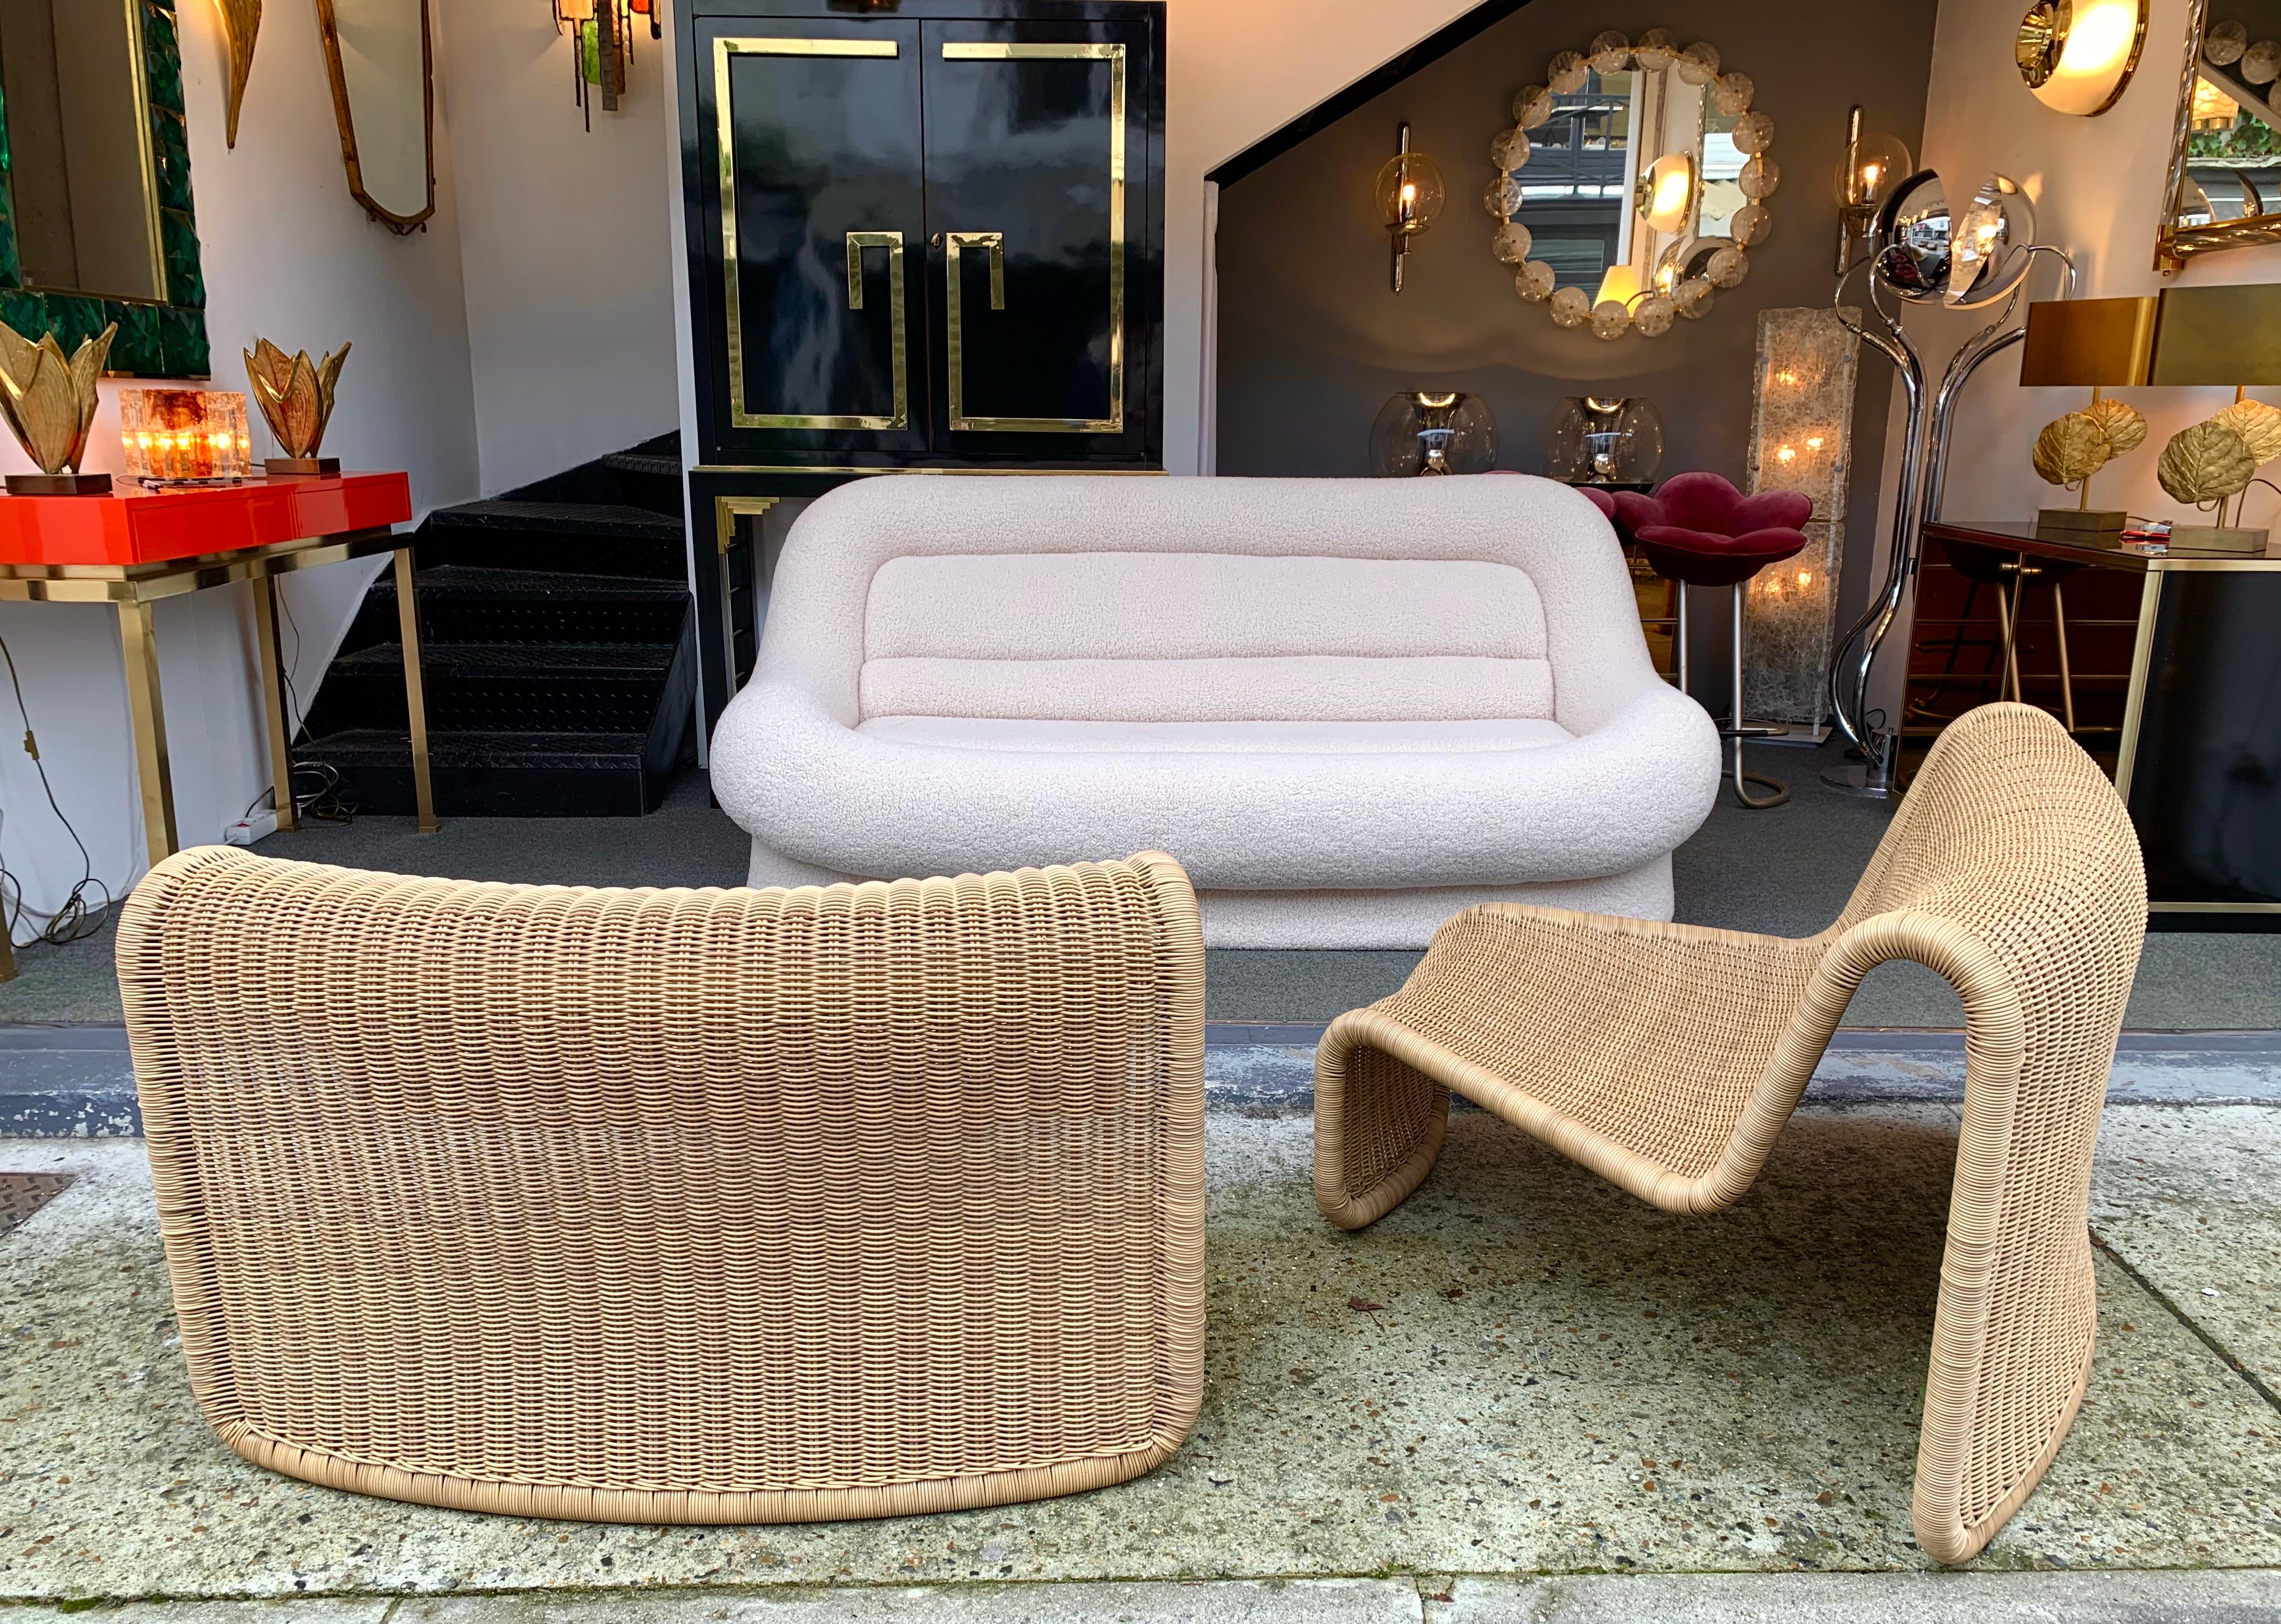 High quality braid synthetic policore style rattan used from the 1980s, very resistant and perfect for outdoor. Pair or set of slipper lounge chairs or armchairs a variant of model P3 by the designer Tito Agnoli. Famous design like Gio Ponti,